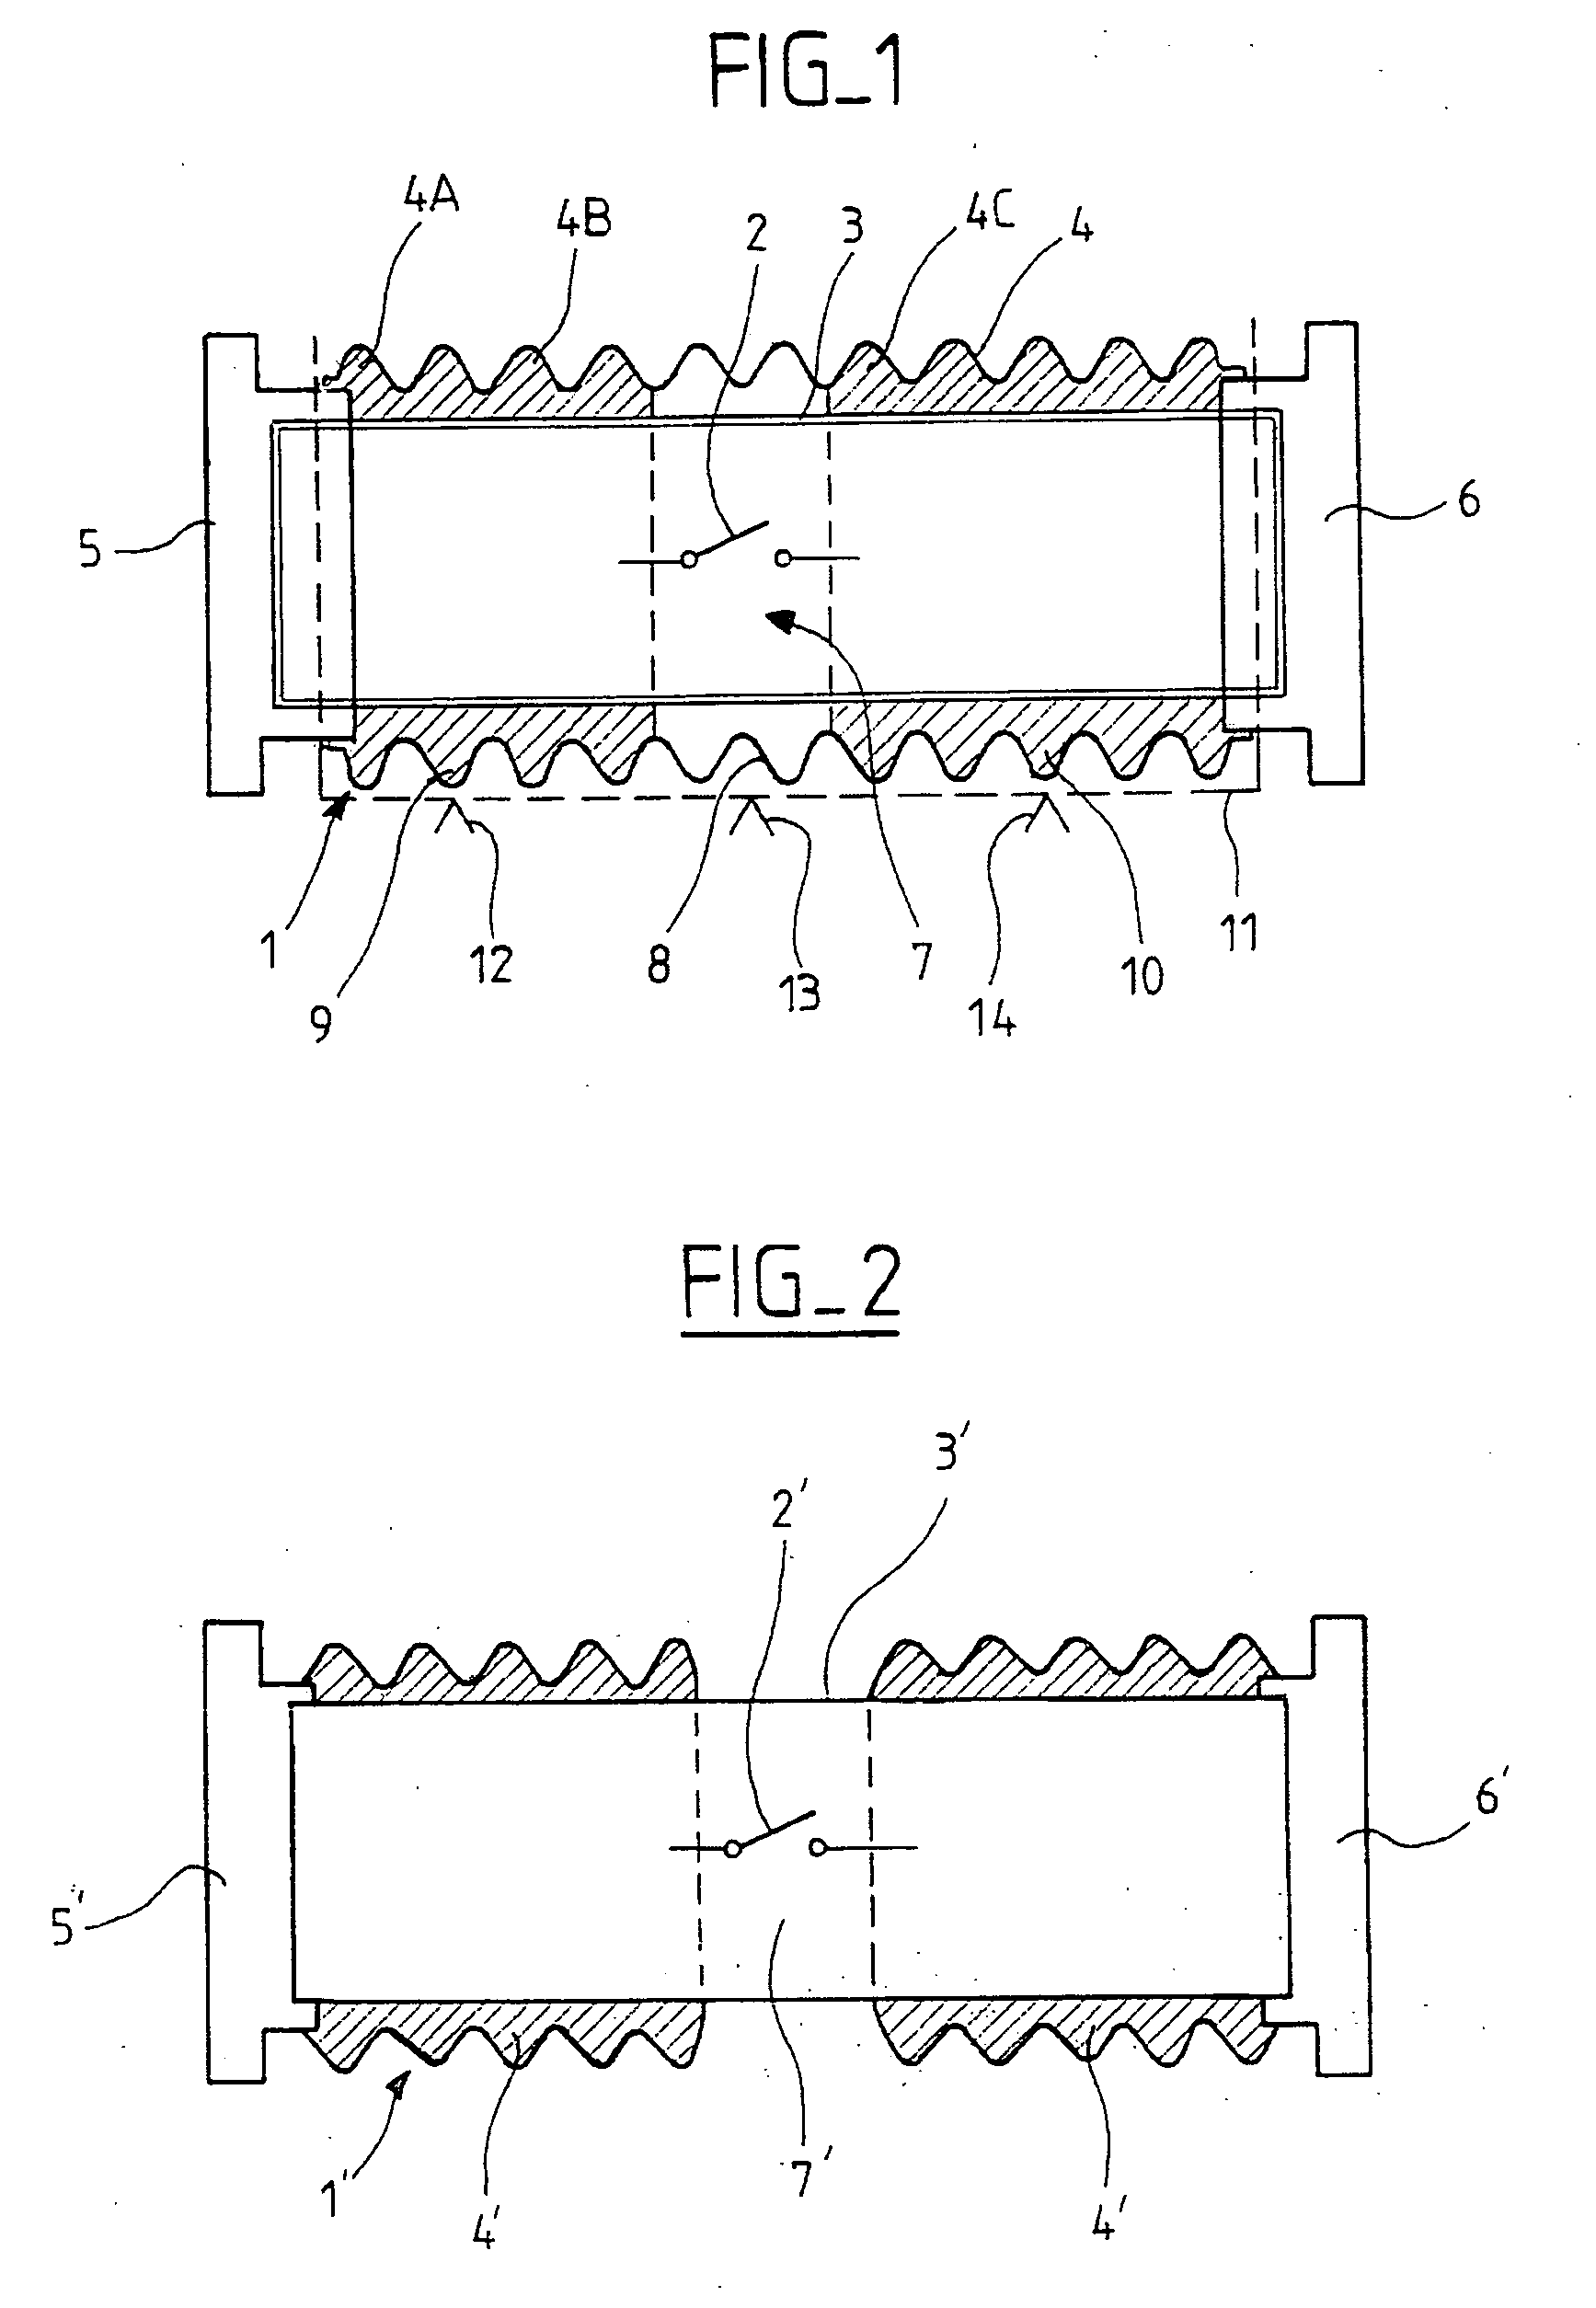 Electrical Device Containing Insulating Gas Under Pressure and Including a Composite Insulator Provided With a Window for Observing Contacts